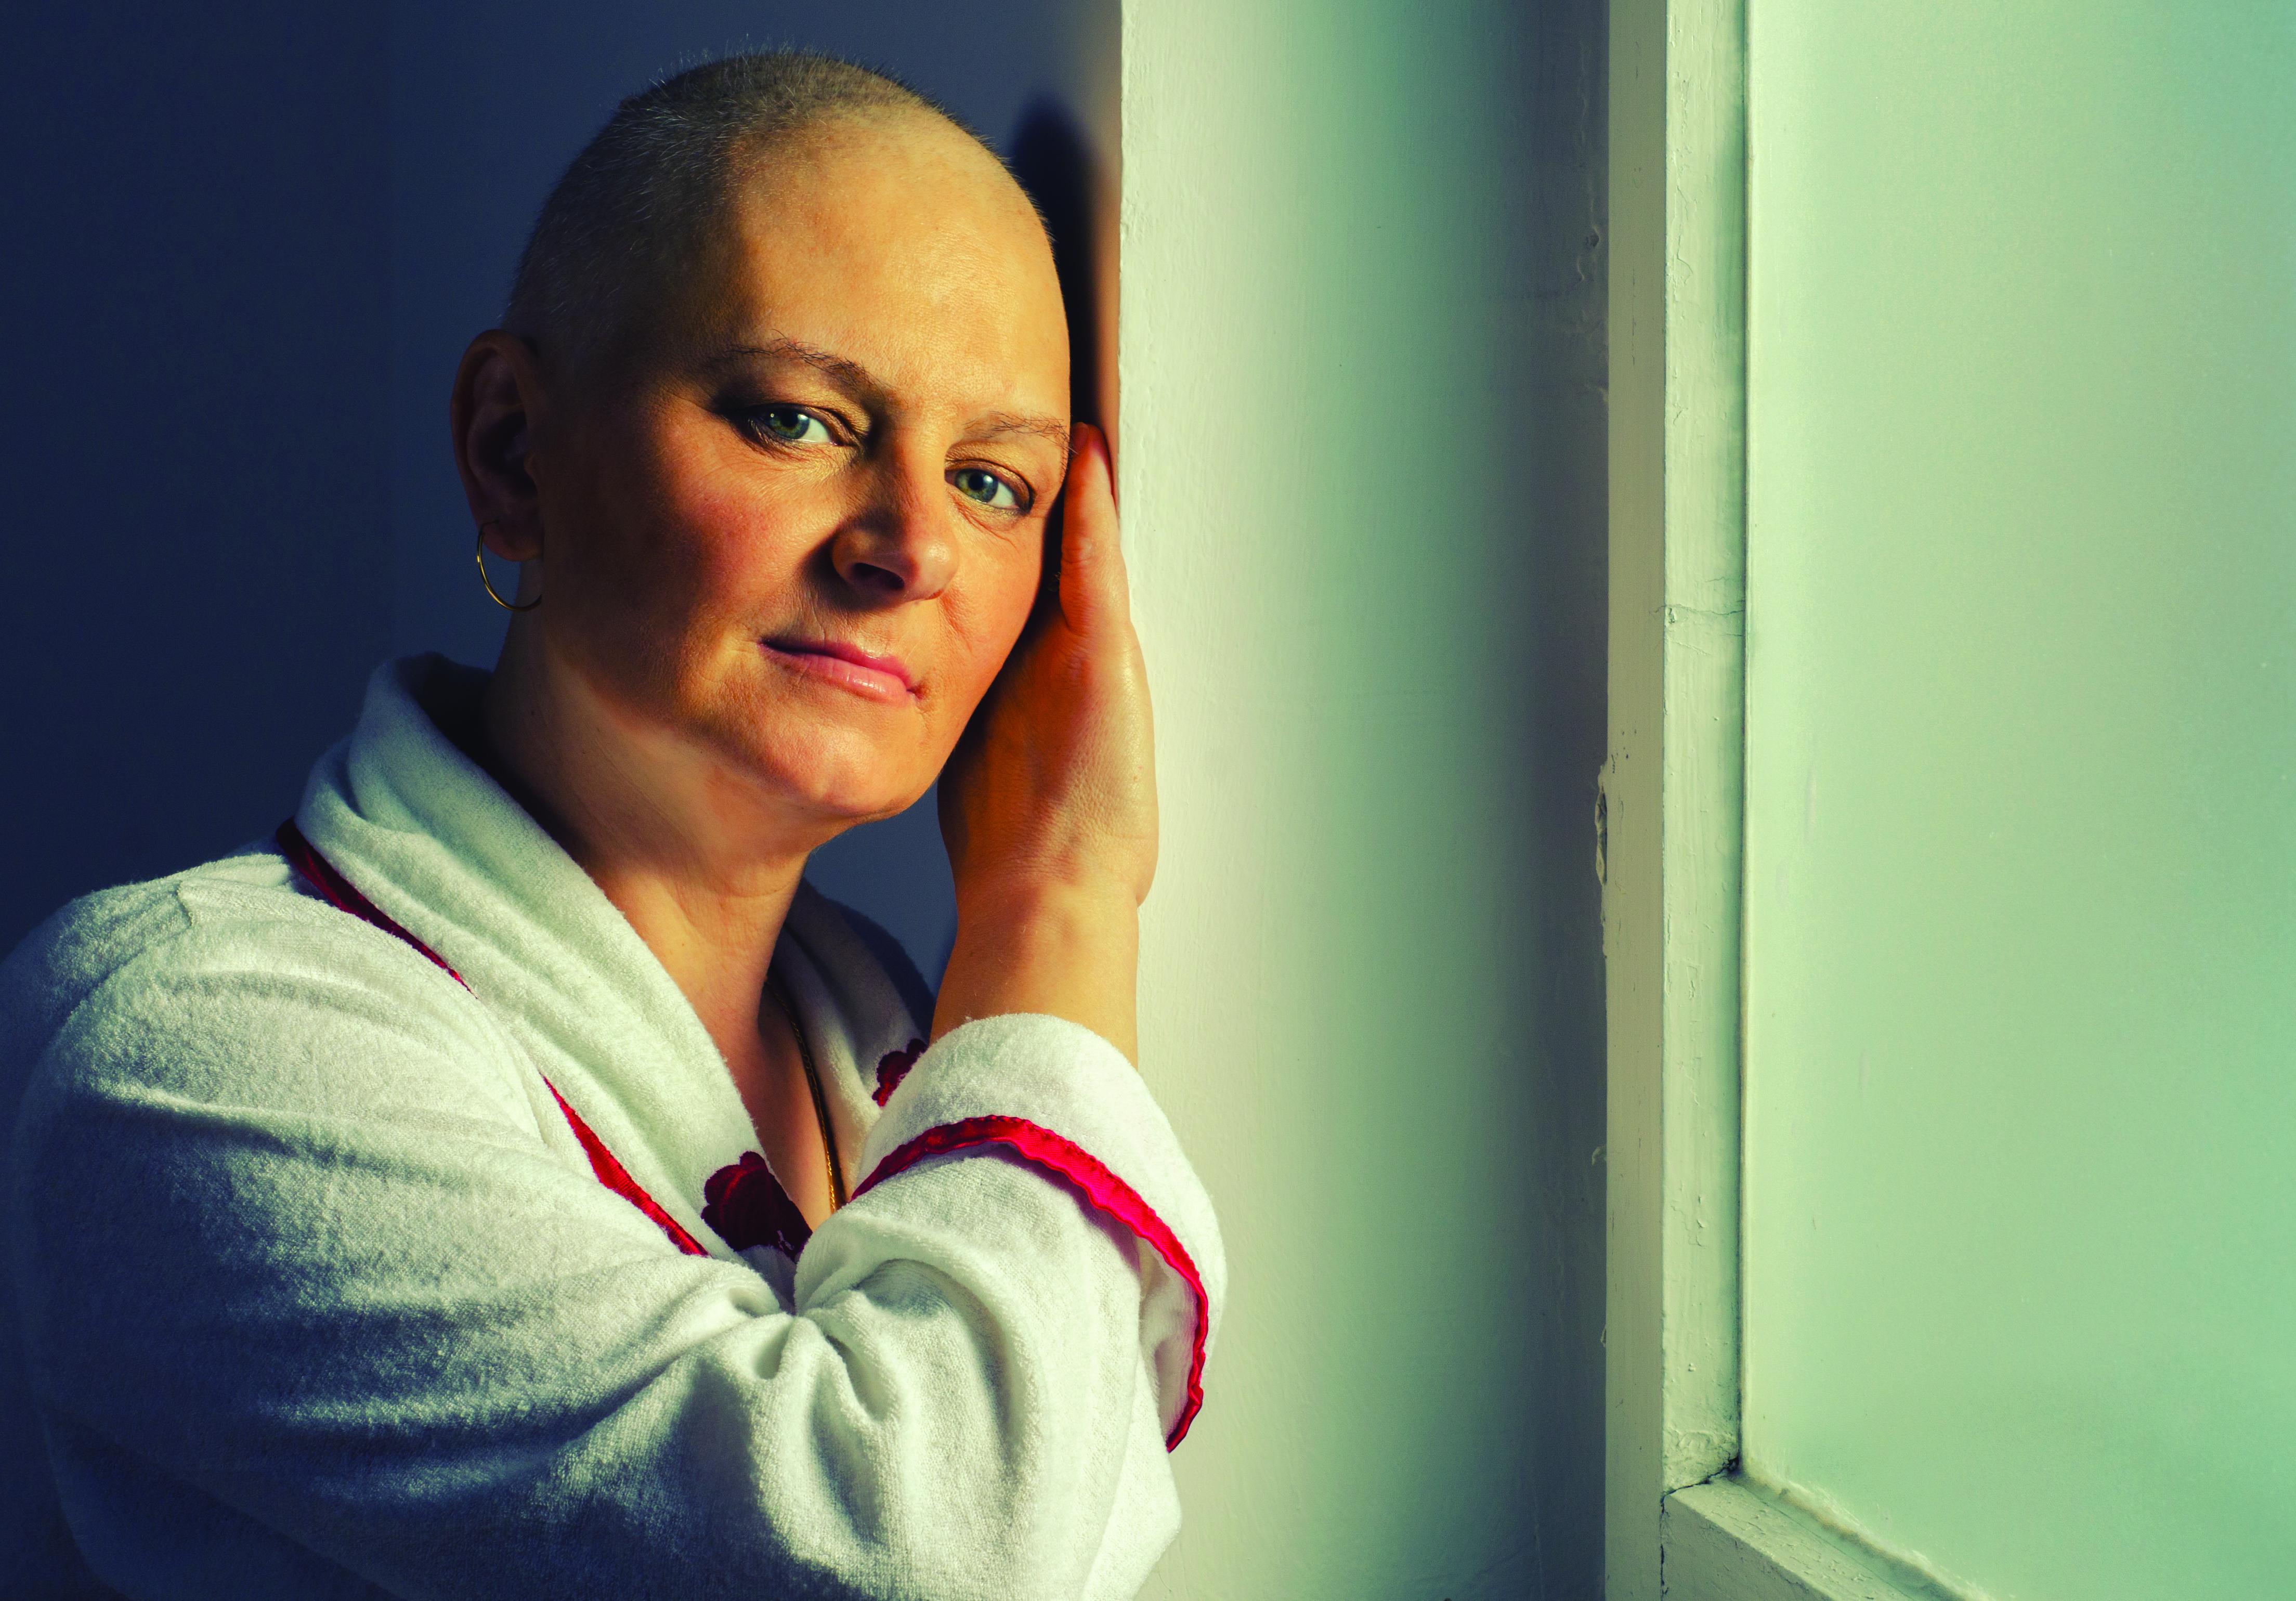 woman with cancer iStock